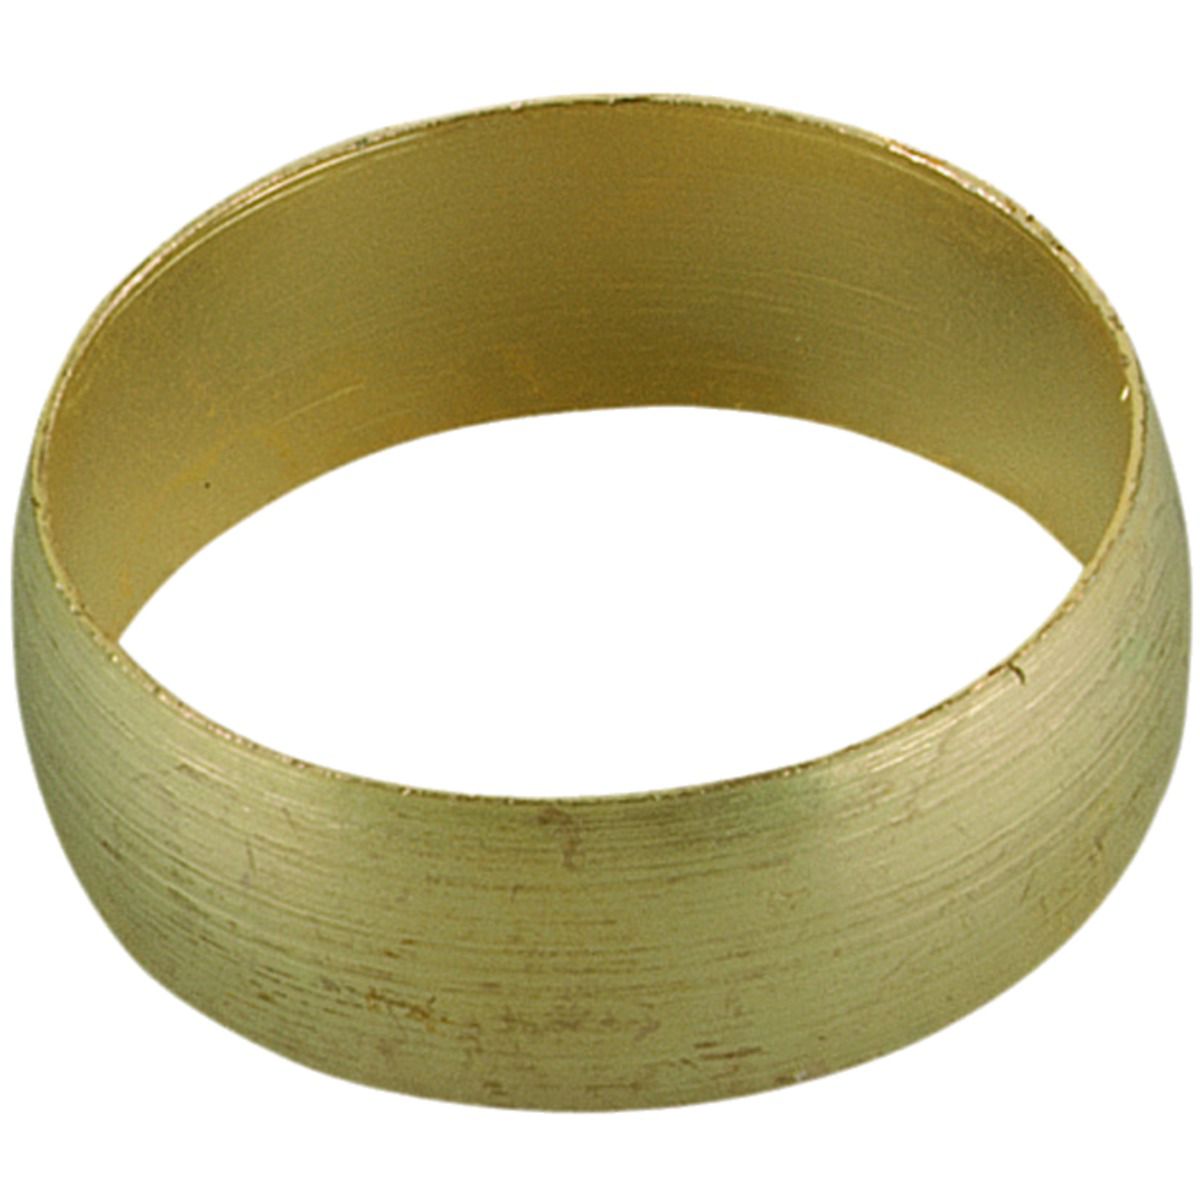 Primaflow Brass Microbore Compression Olive Ring - 8mm Pack Of 5